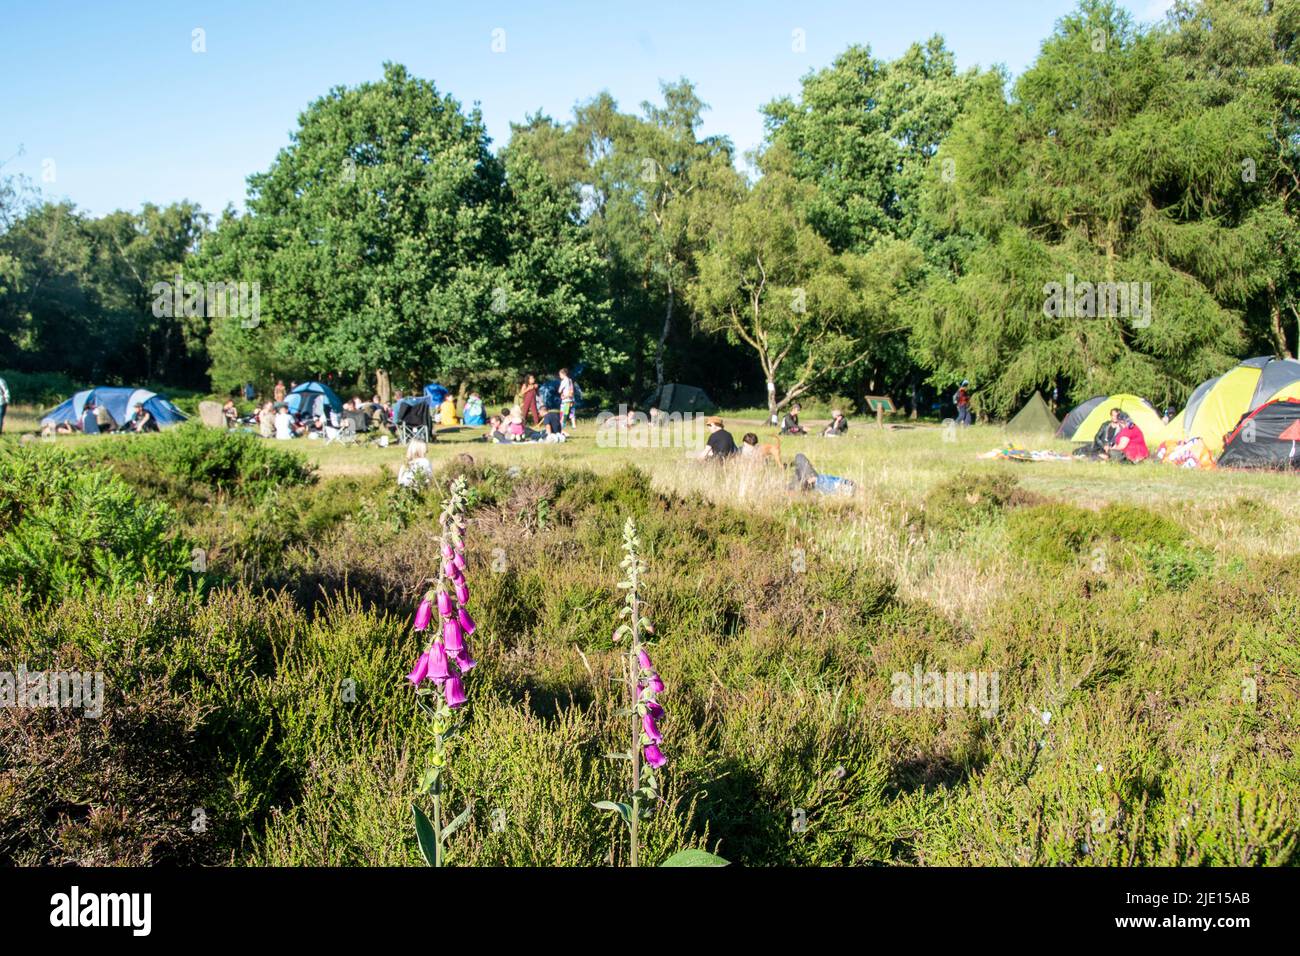 Derbyshire UK: 21 June 2018: Beautiful foxglove flower and people gathered at Nine Ladies Stone circle to celebrate the Solstice and midsummers day Stock Photo